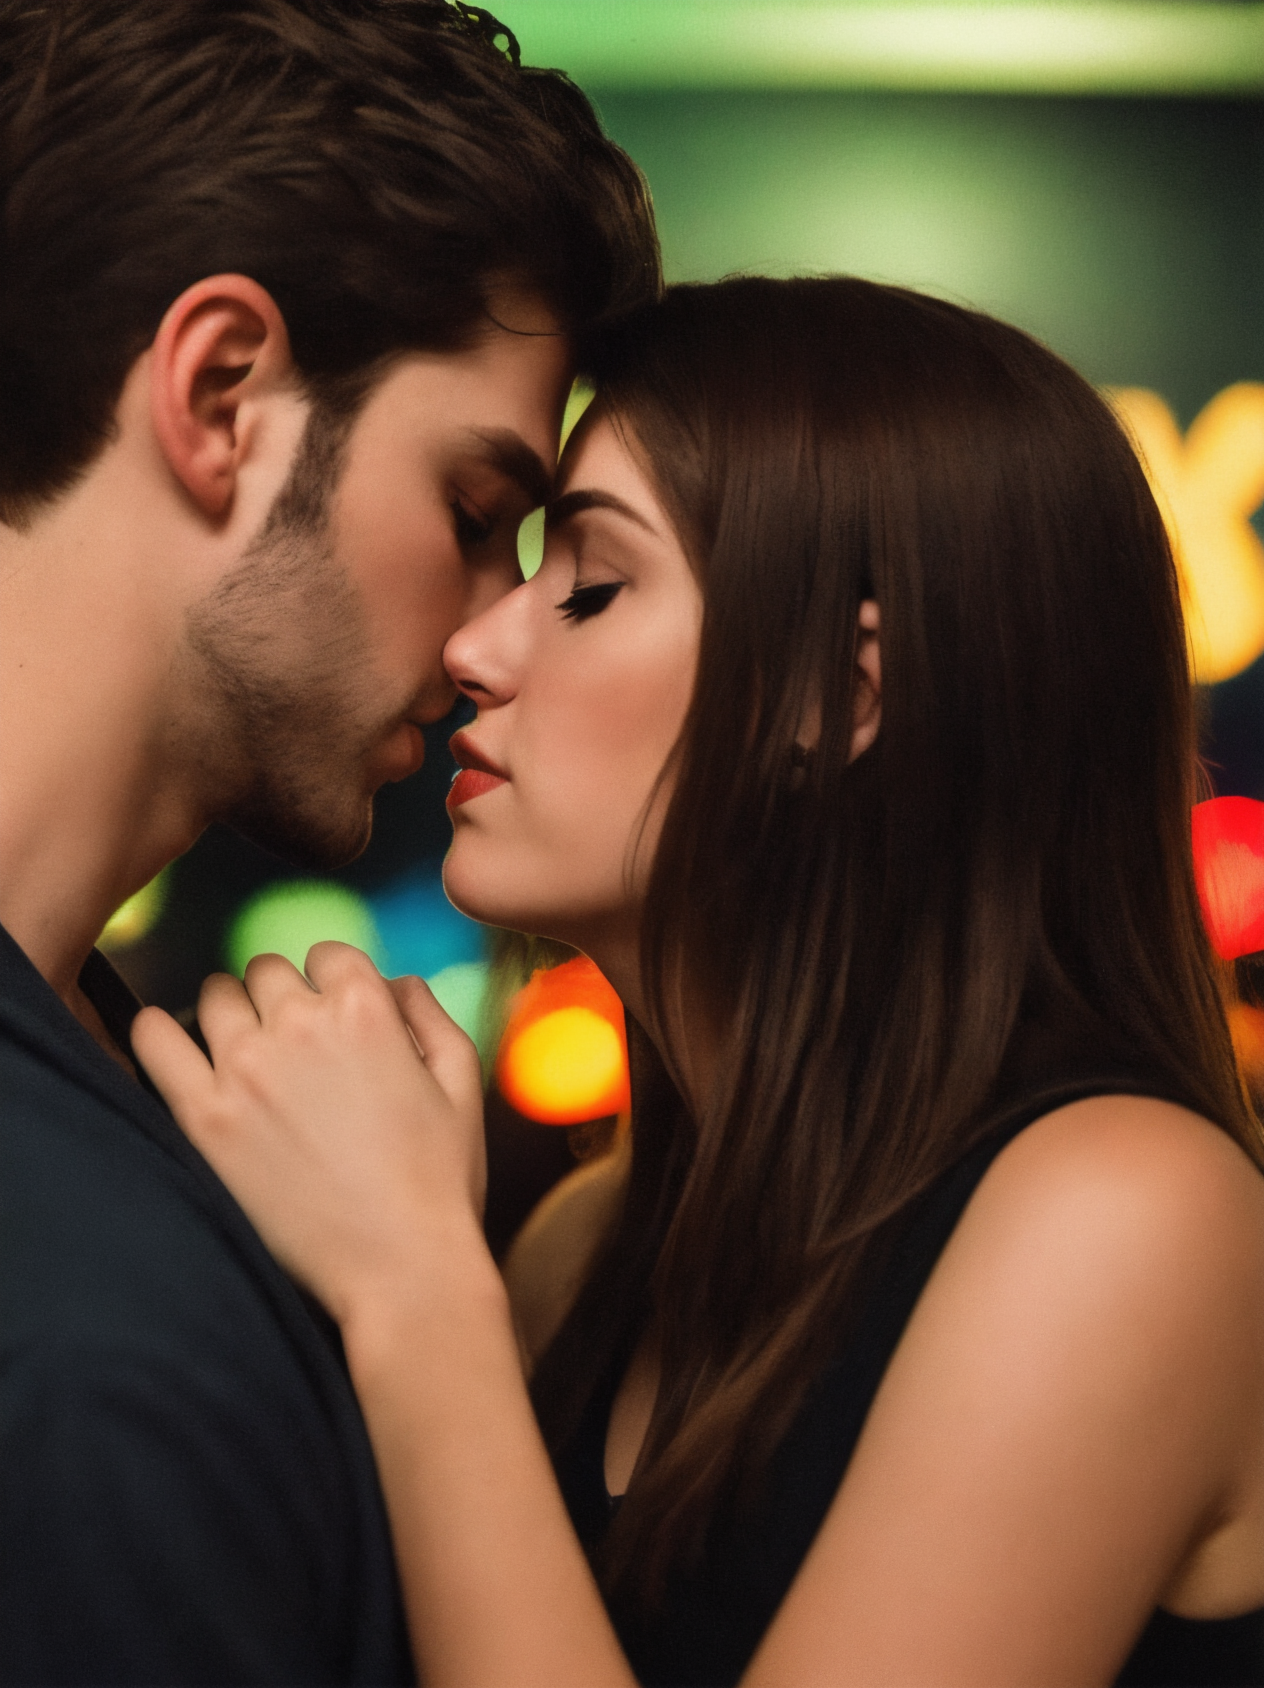 26 year old girl in a club, eyes closed about to kiss a boy with a stubble, neck grab, intimate couple photography, love, ...